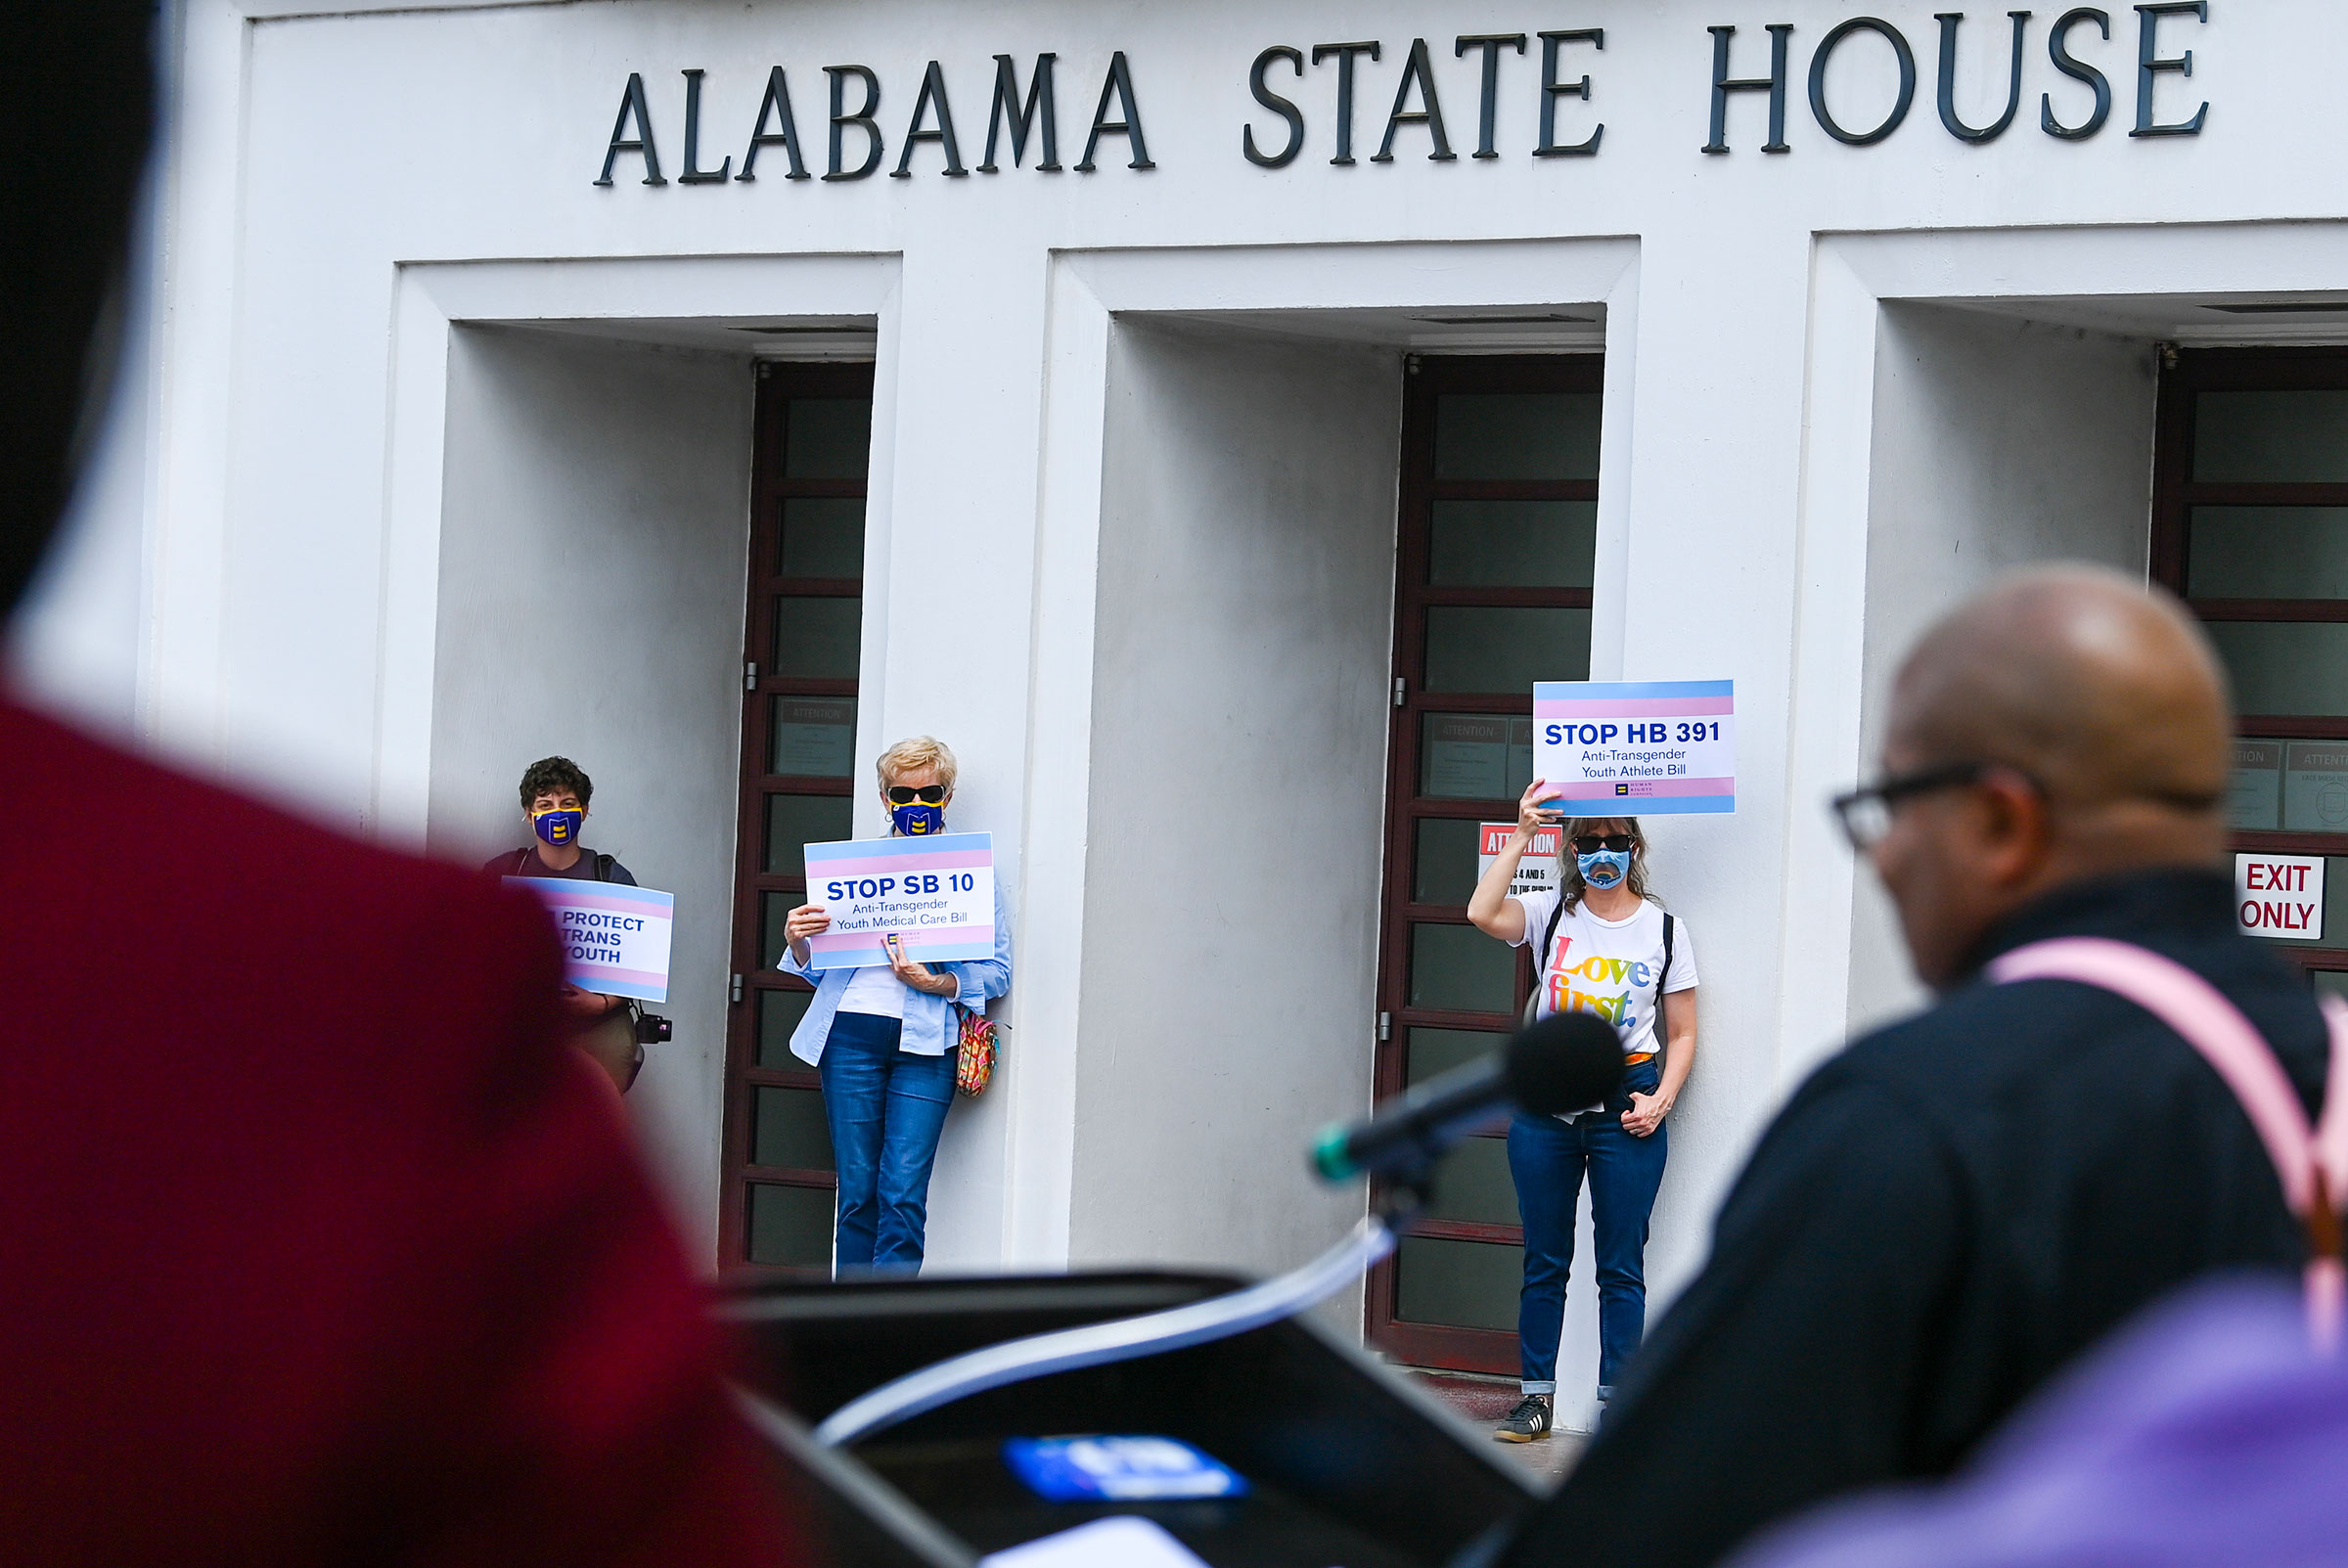 Opponents of several bills targeting transgender youth attend a rally at the Alabama State House to draw attention to anti-transgender legislation introduced in Alabama on March 30, 2021. (Julie Bennett—Getty Images)